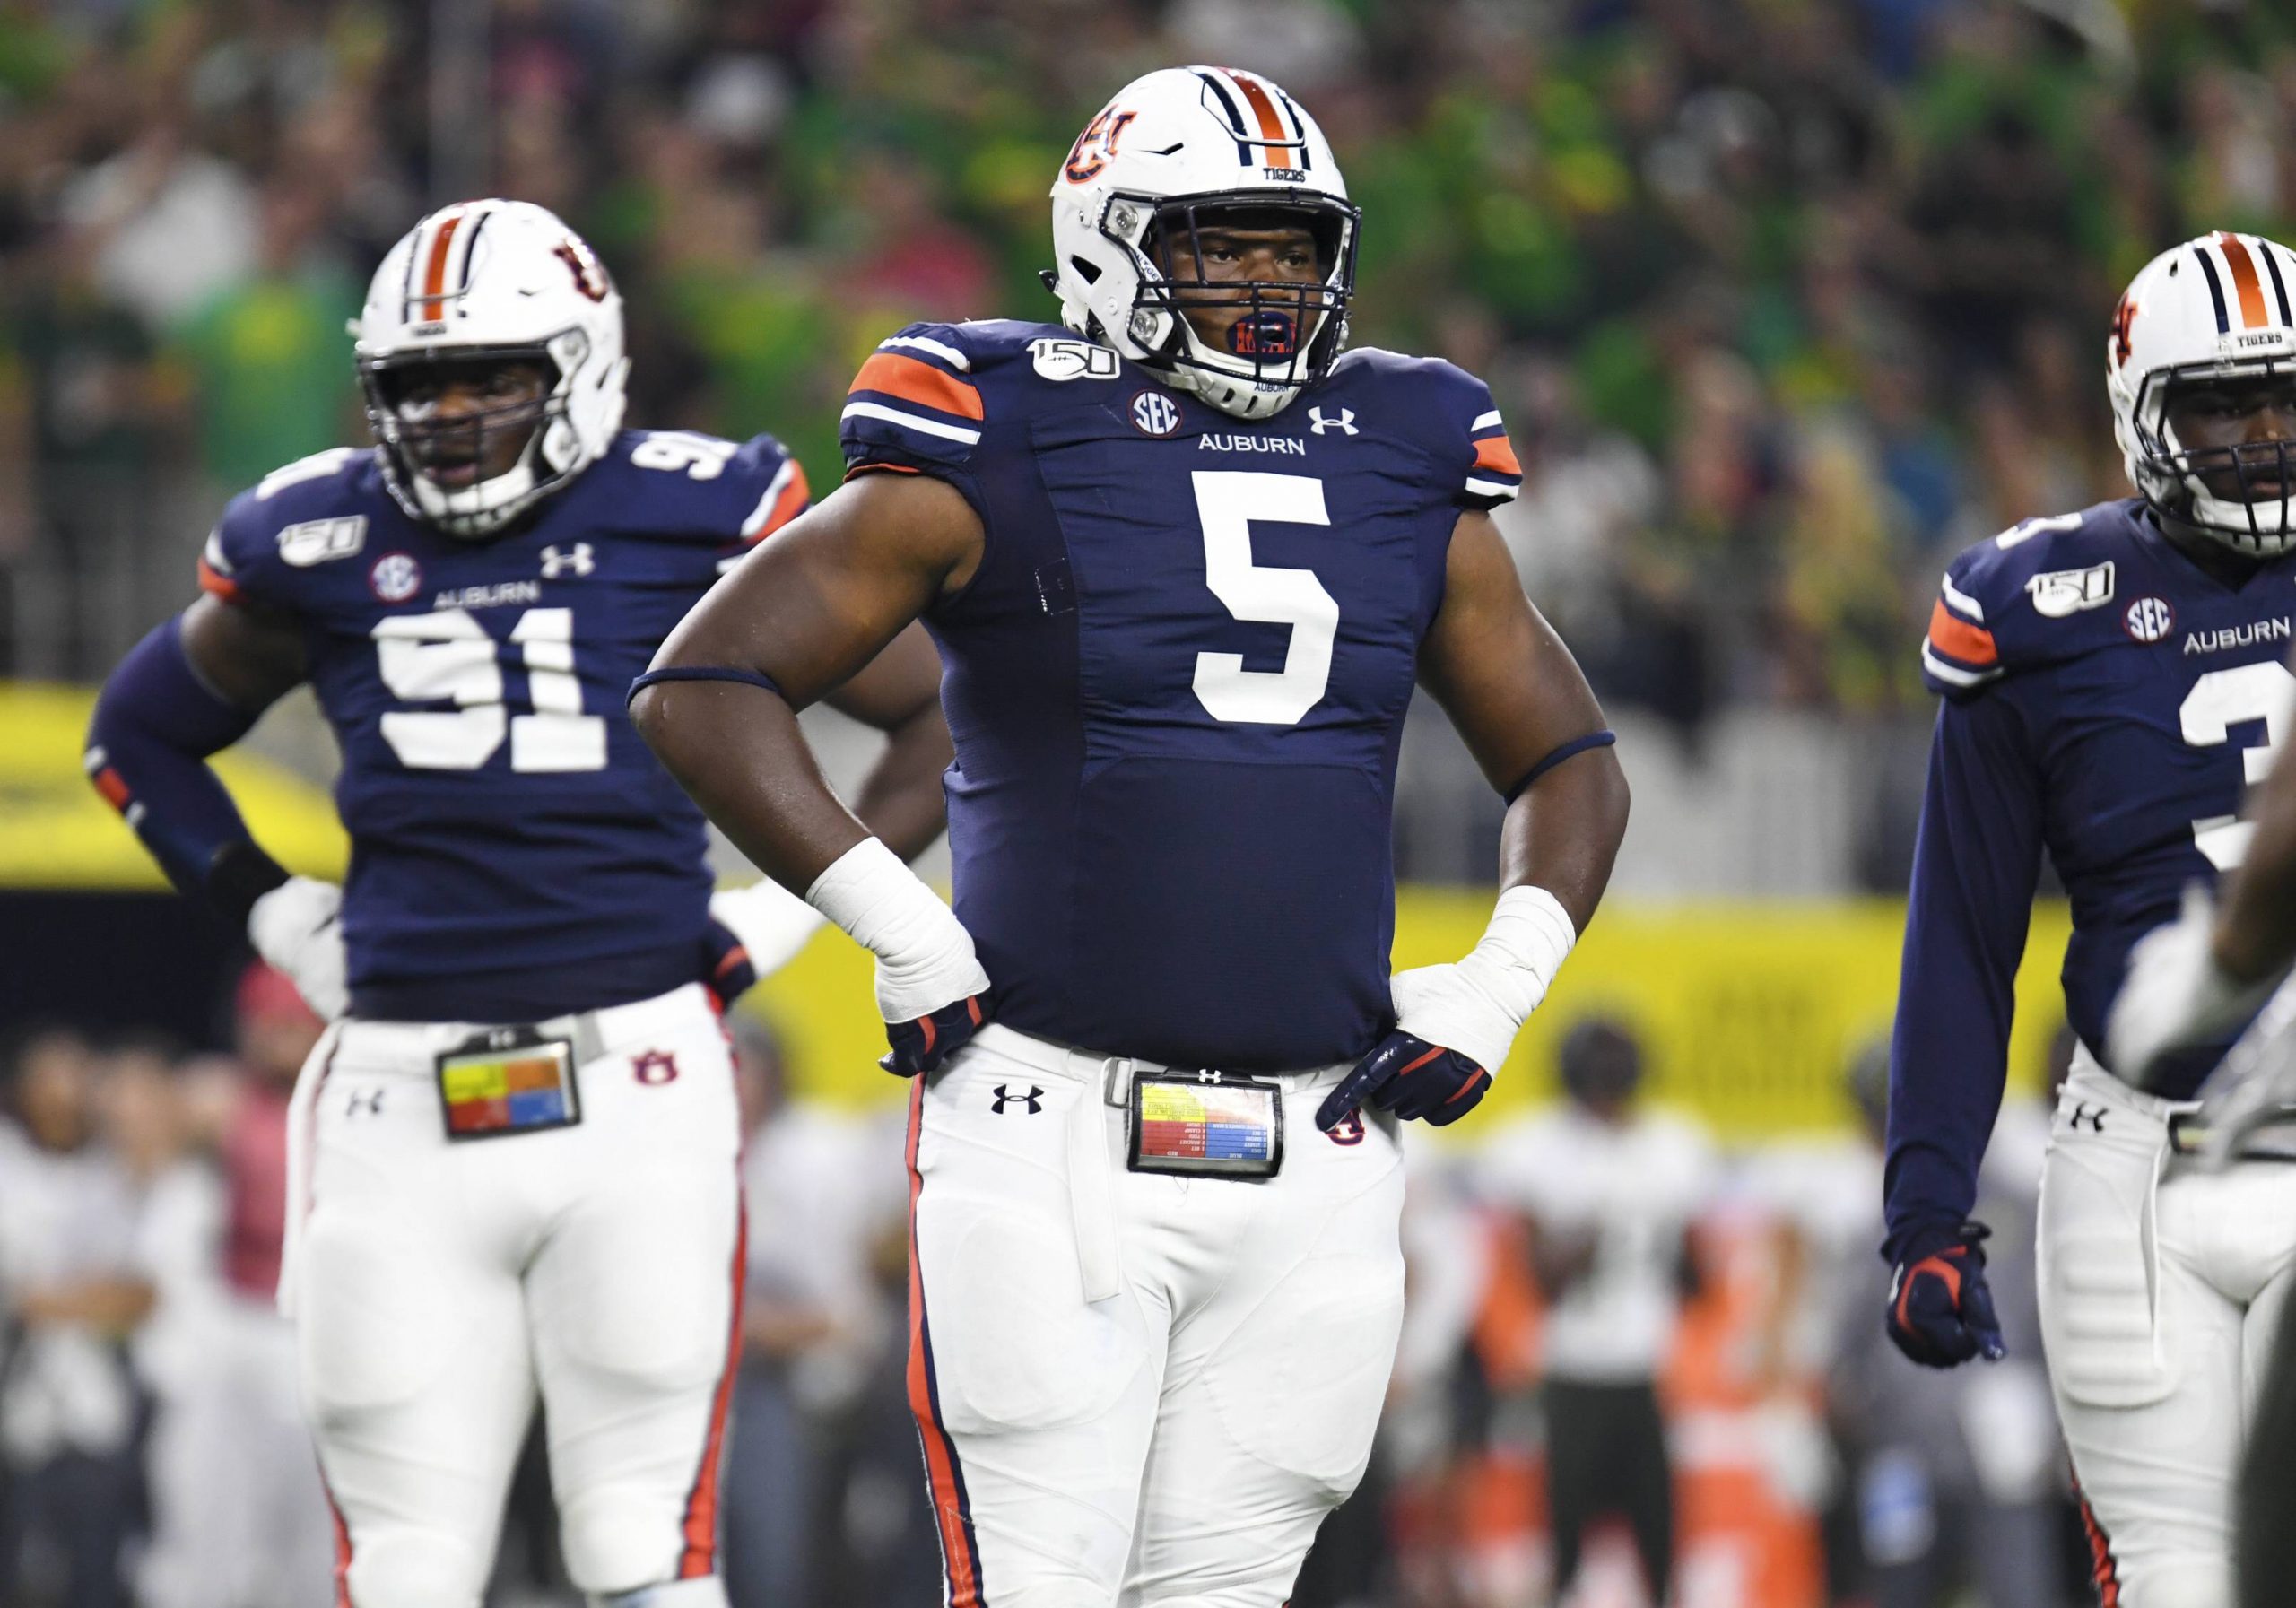 August 31 2019 Auburn Tigers defensive tackle Derrick Brown 5 in the NCAA College League USA Adv